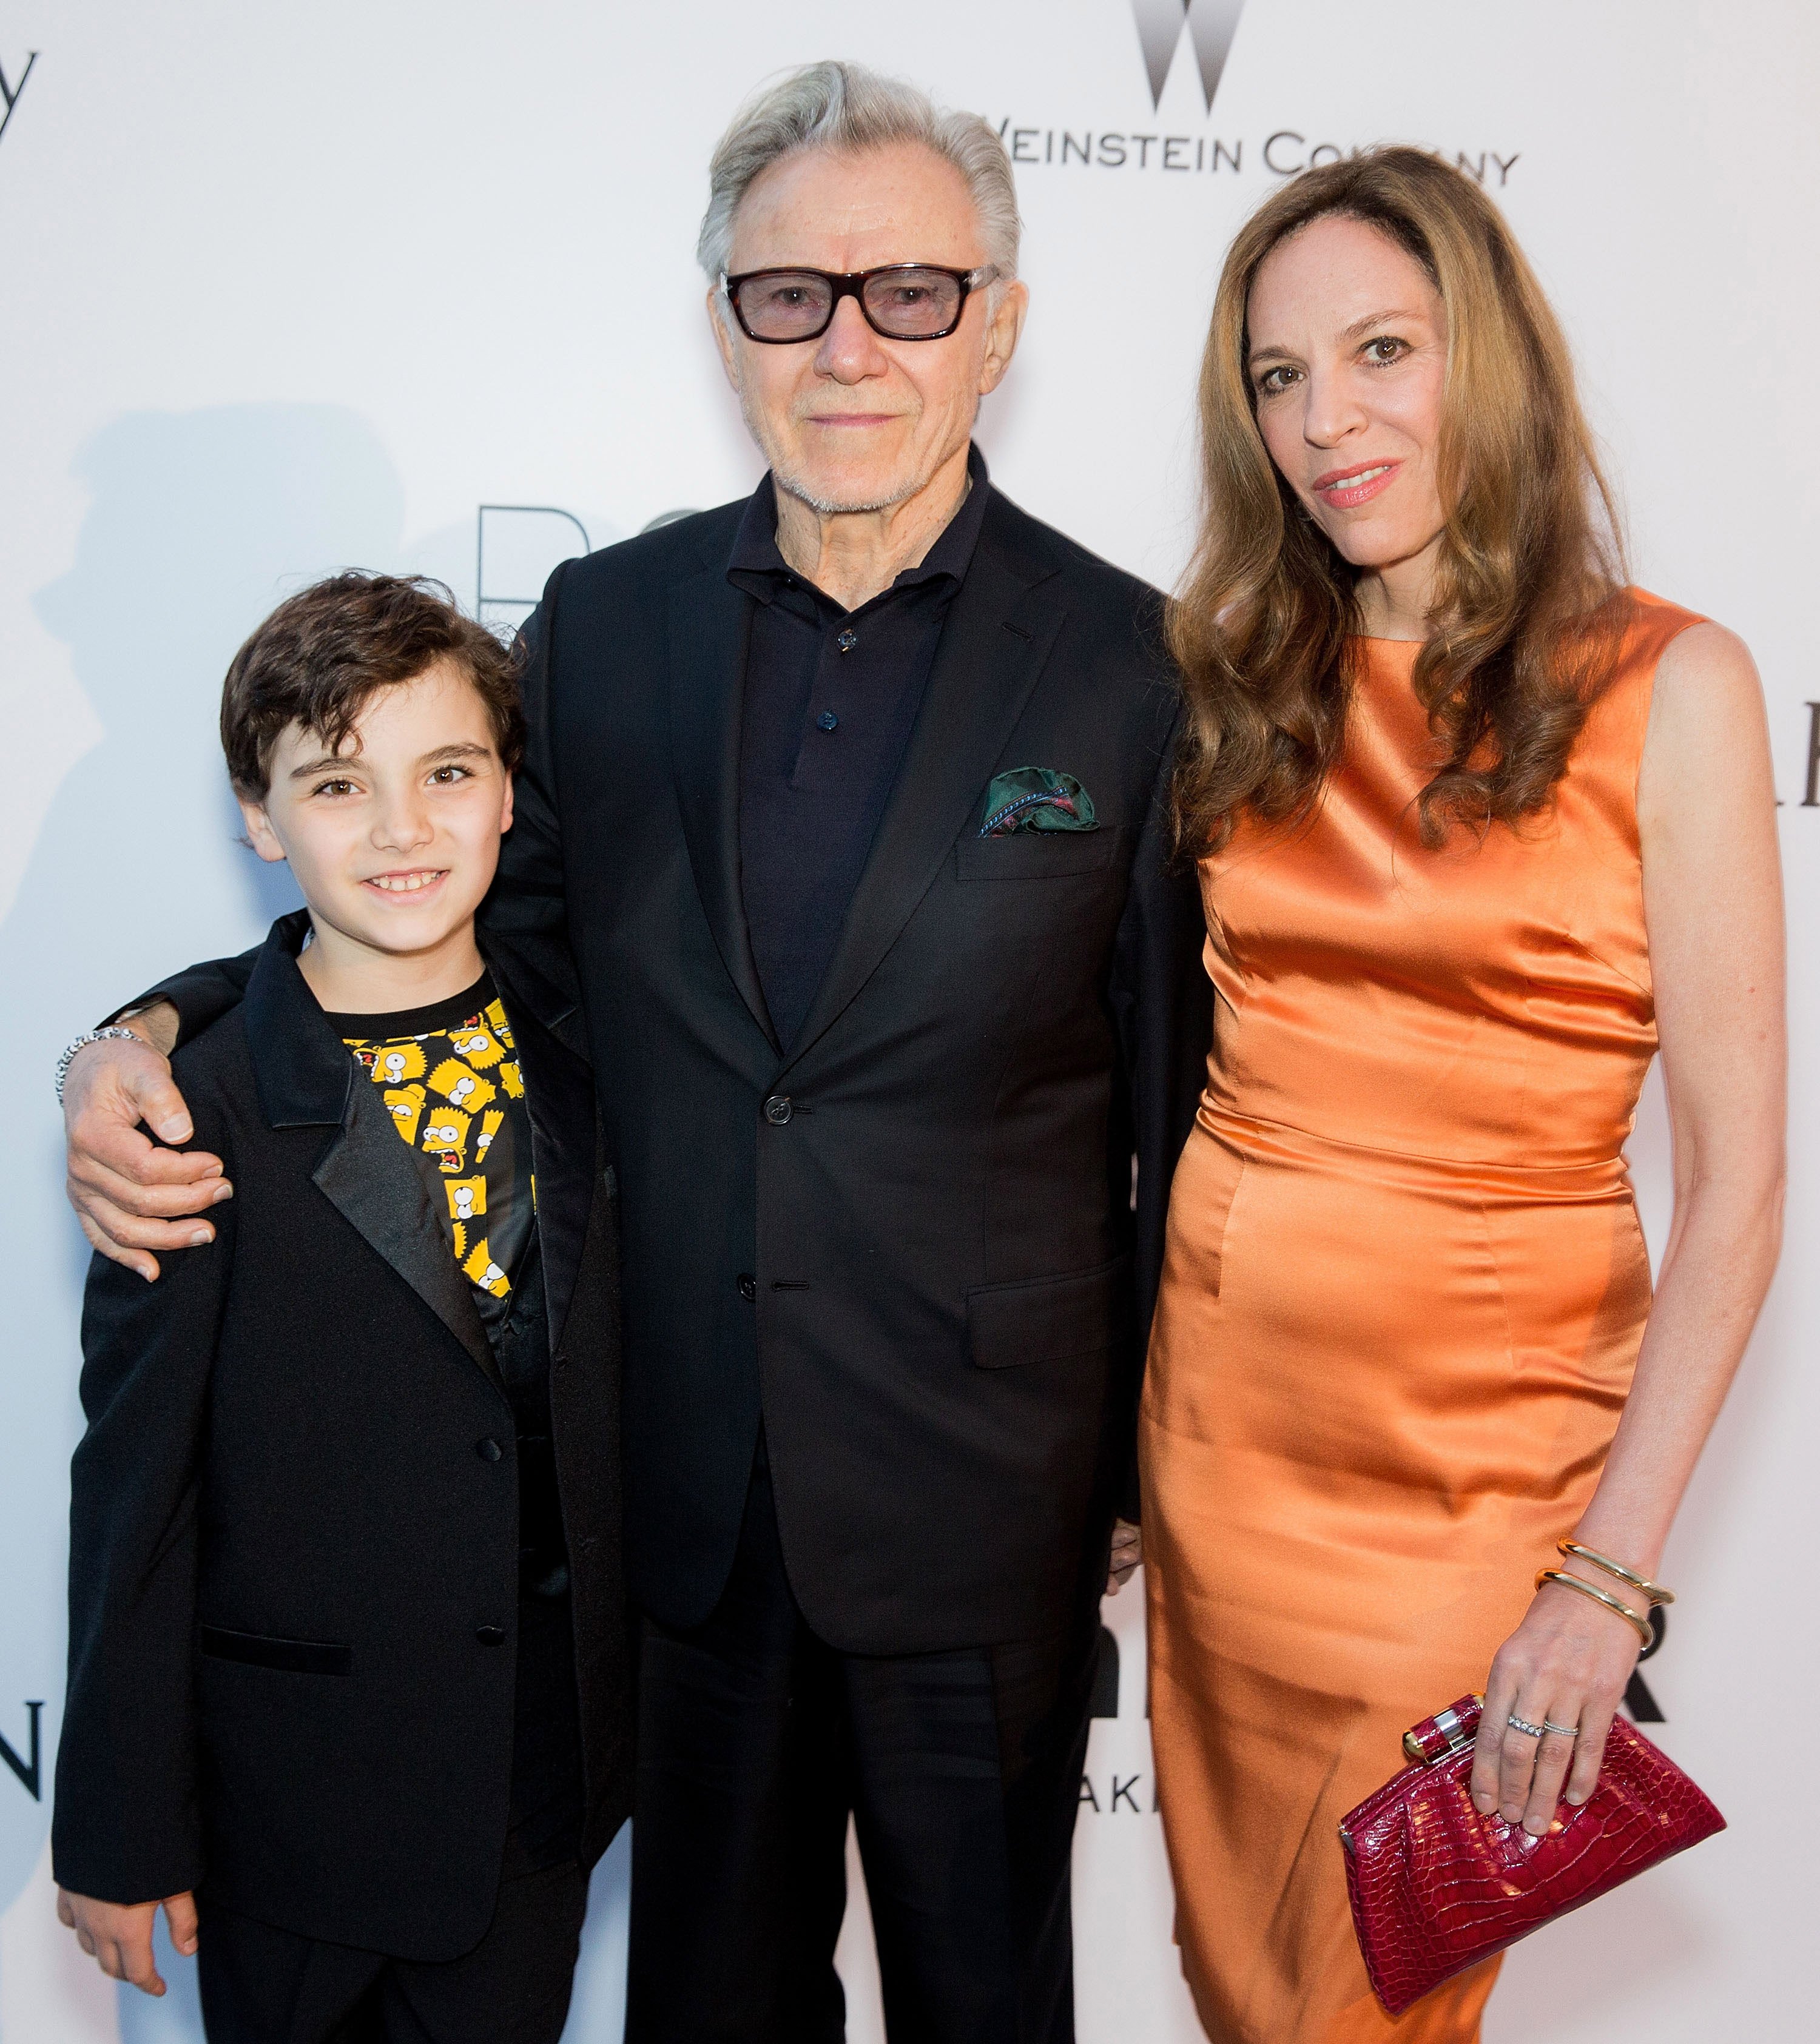 Harvey Keitel, his wife Daphna Kastner and their son arrive for the amfAR 22nd Annual Cinema Against AIDS Gala at Hotel du Cap-Eden-Roc on May 21, 2015 in Cap d'Antibes, France. | Source: Getty Images